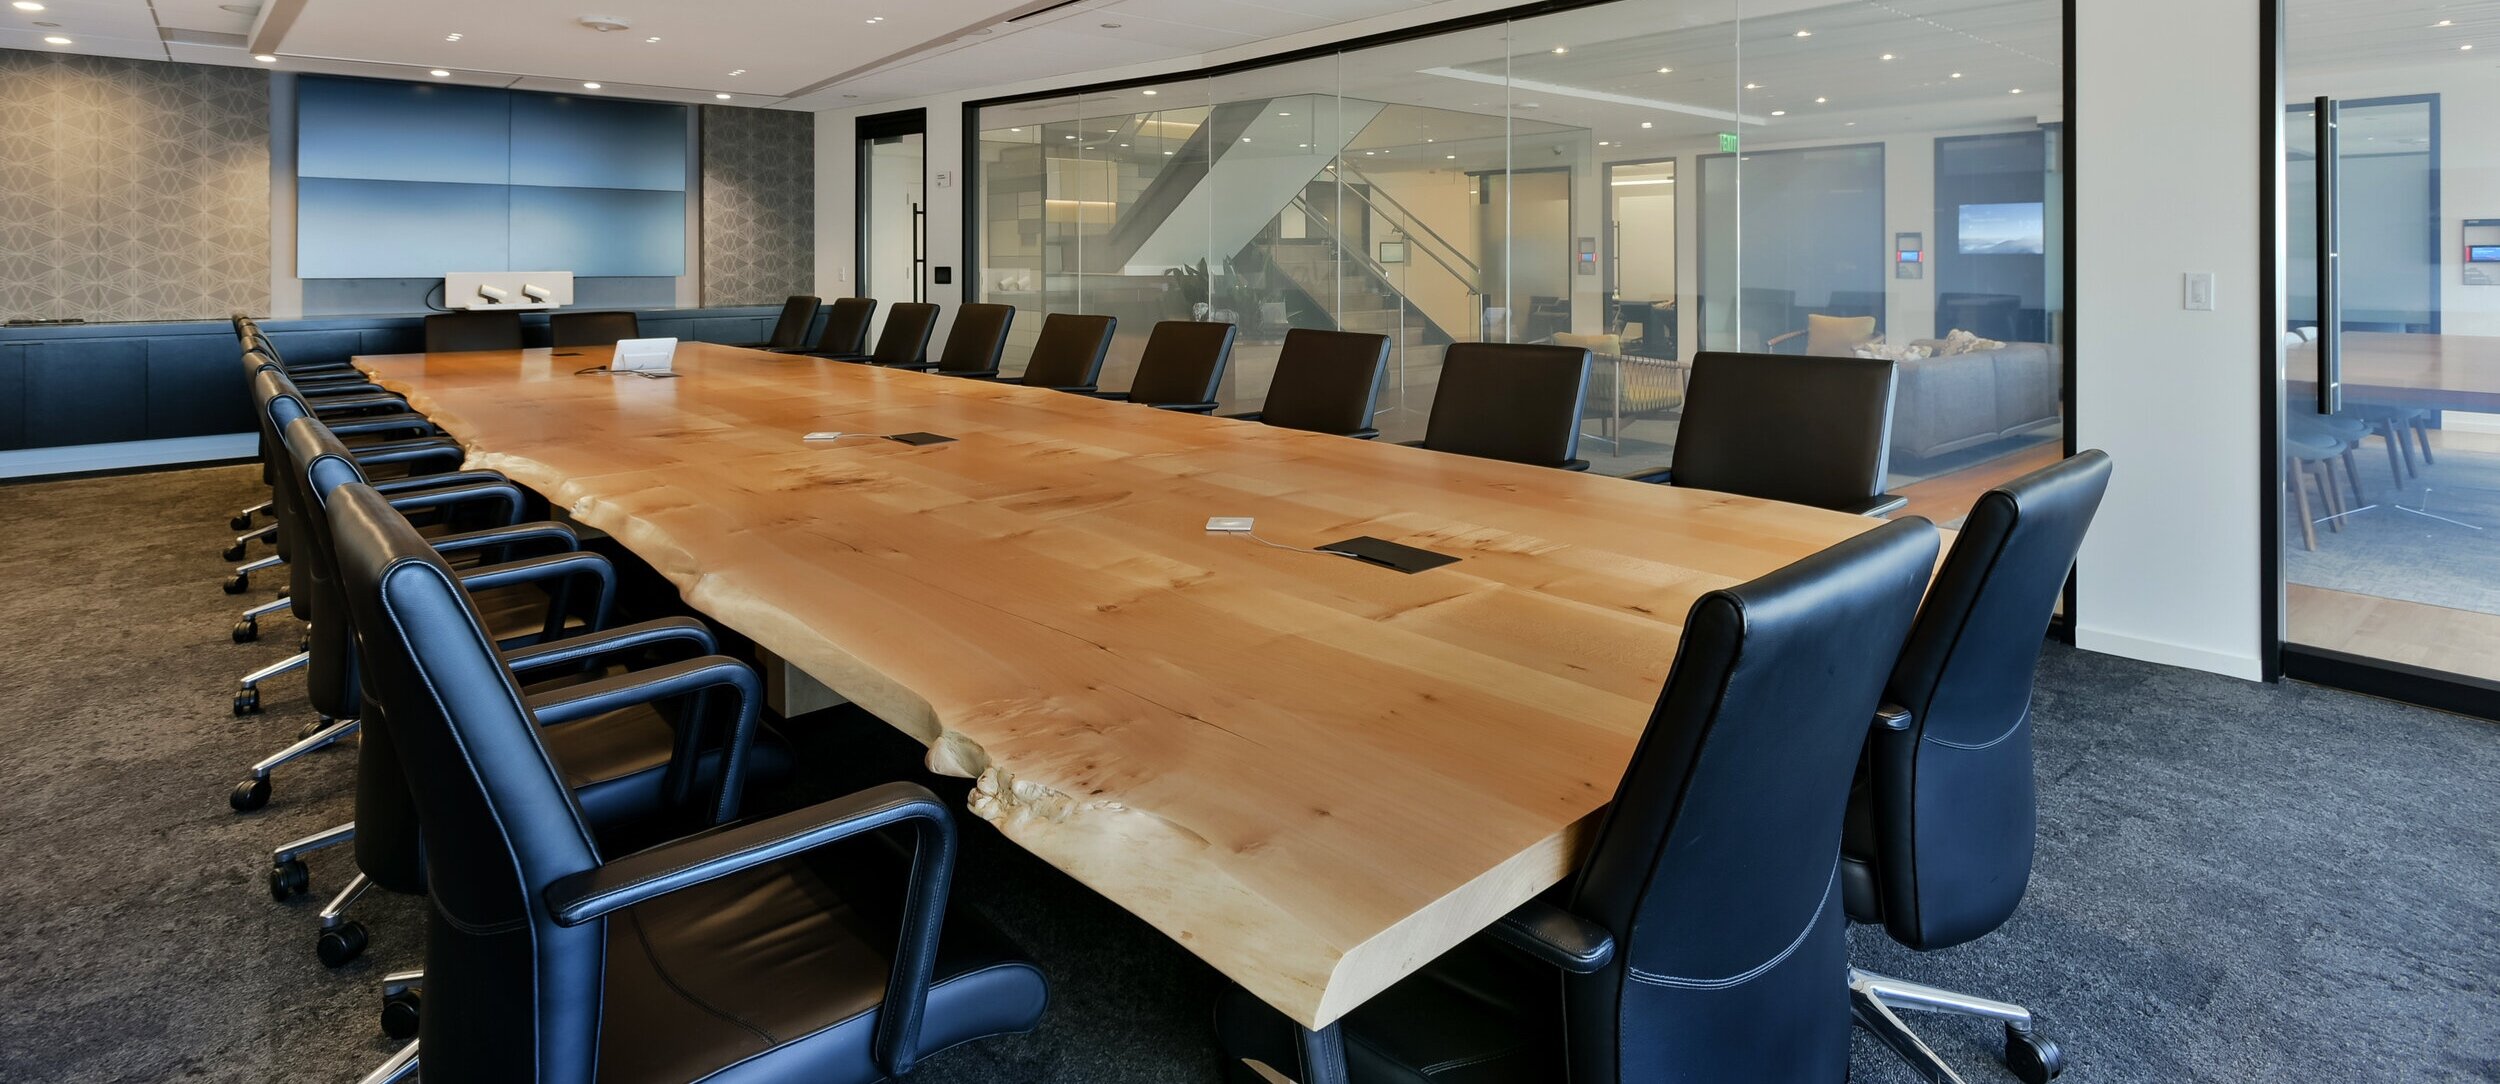 live edge planked maple conference table in clear finish